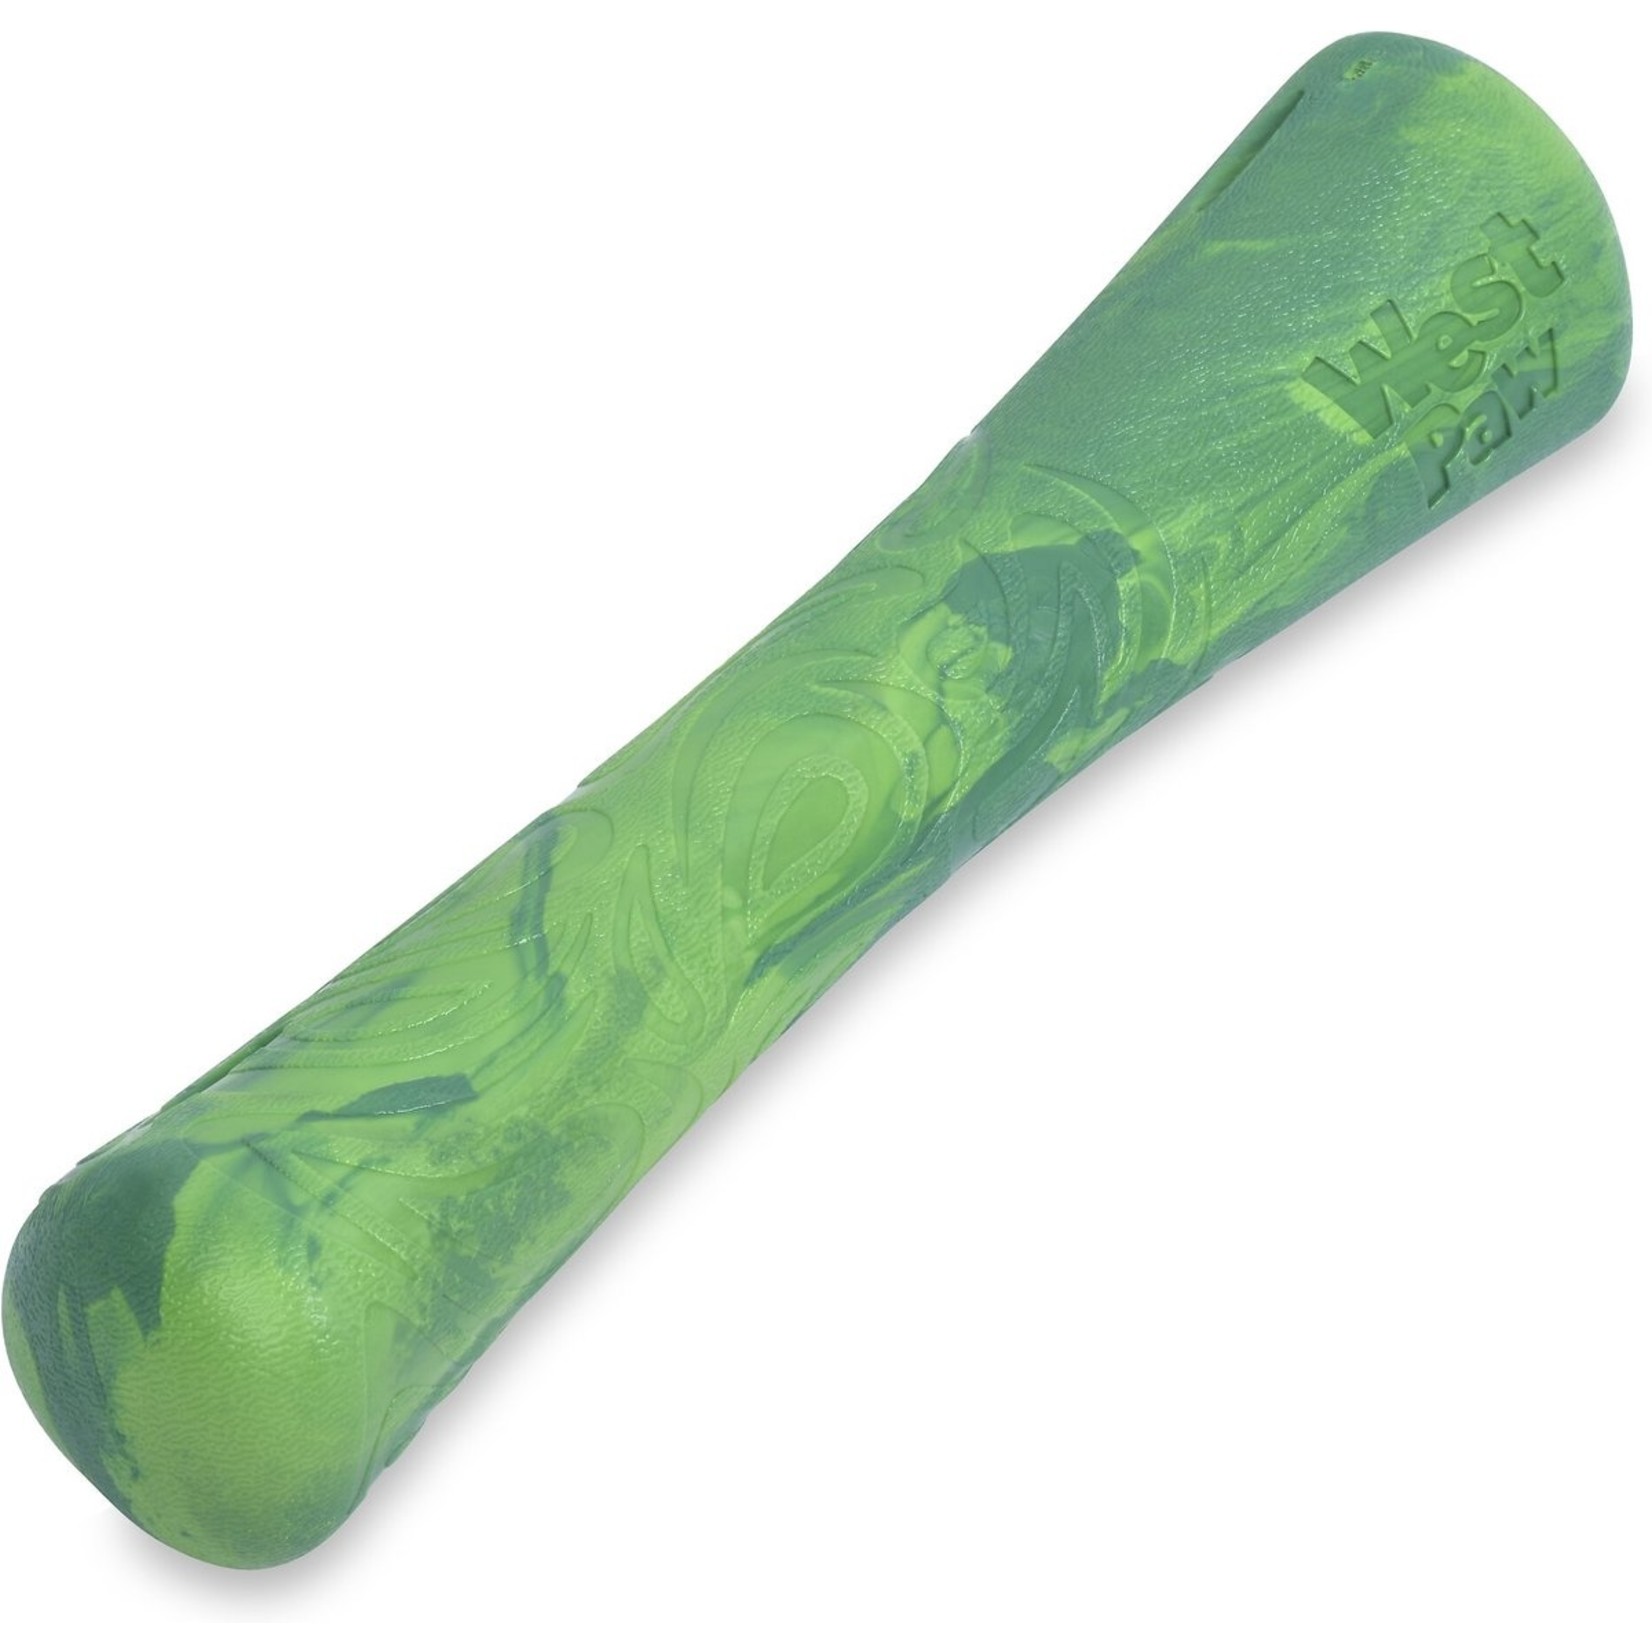 West Paw WEST PAW DRIFTY LARGE Green